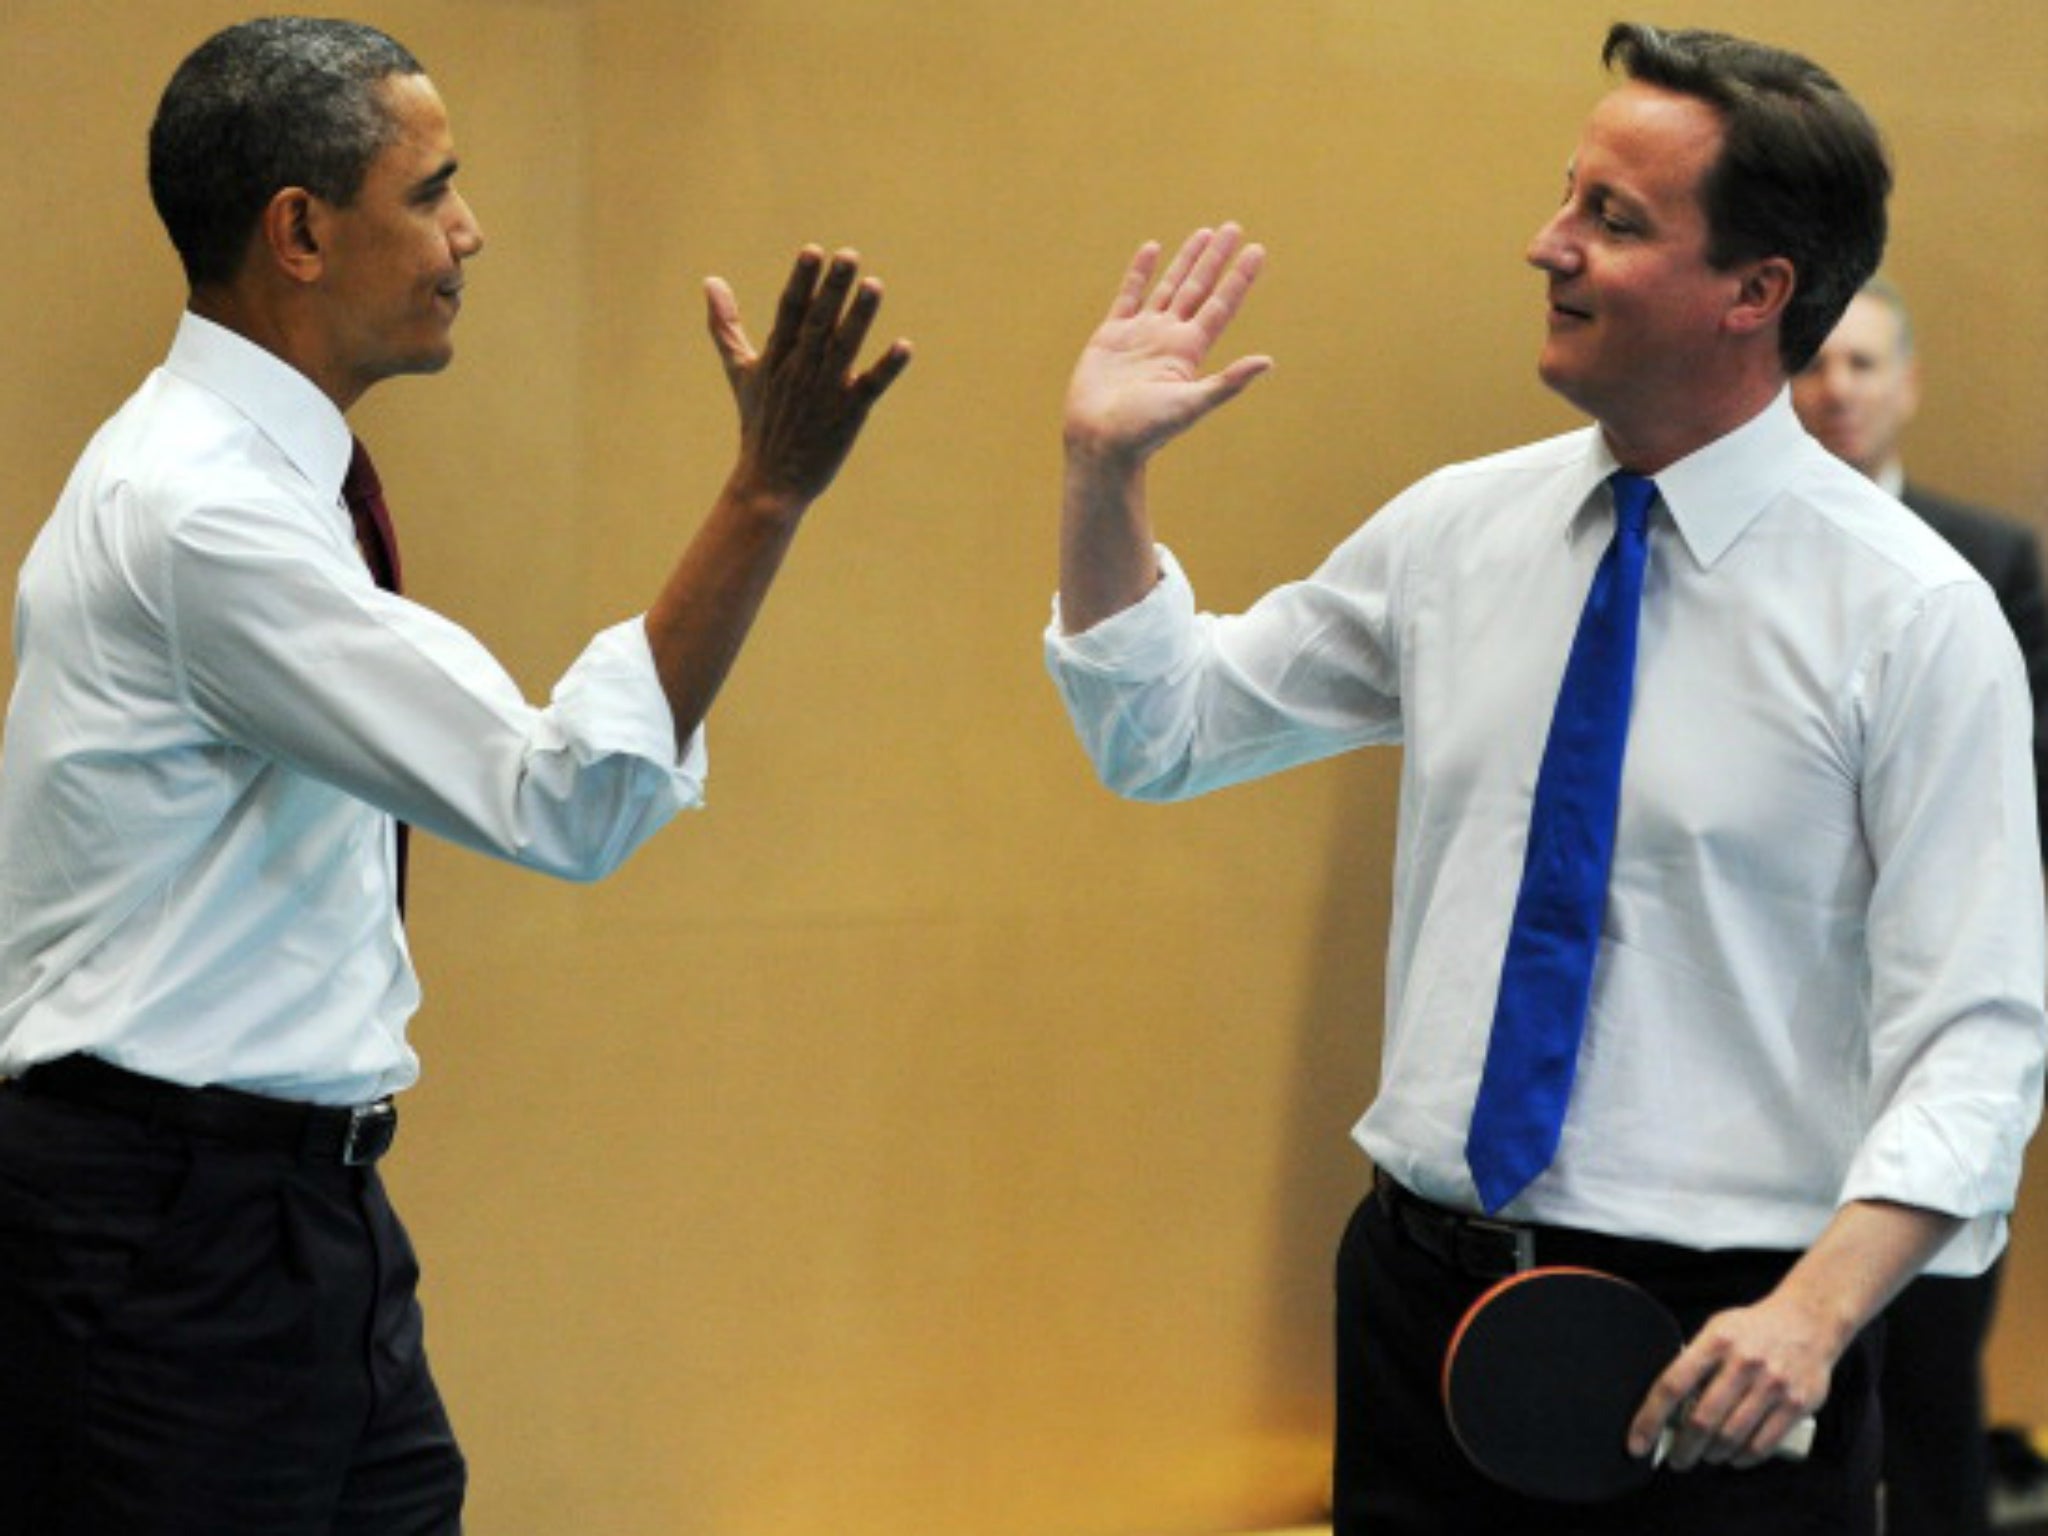 High five: Obama and Cameron playing table tennis at the Globe Academy School in London 2011